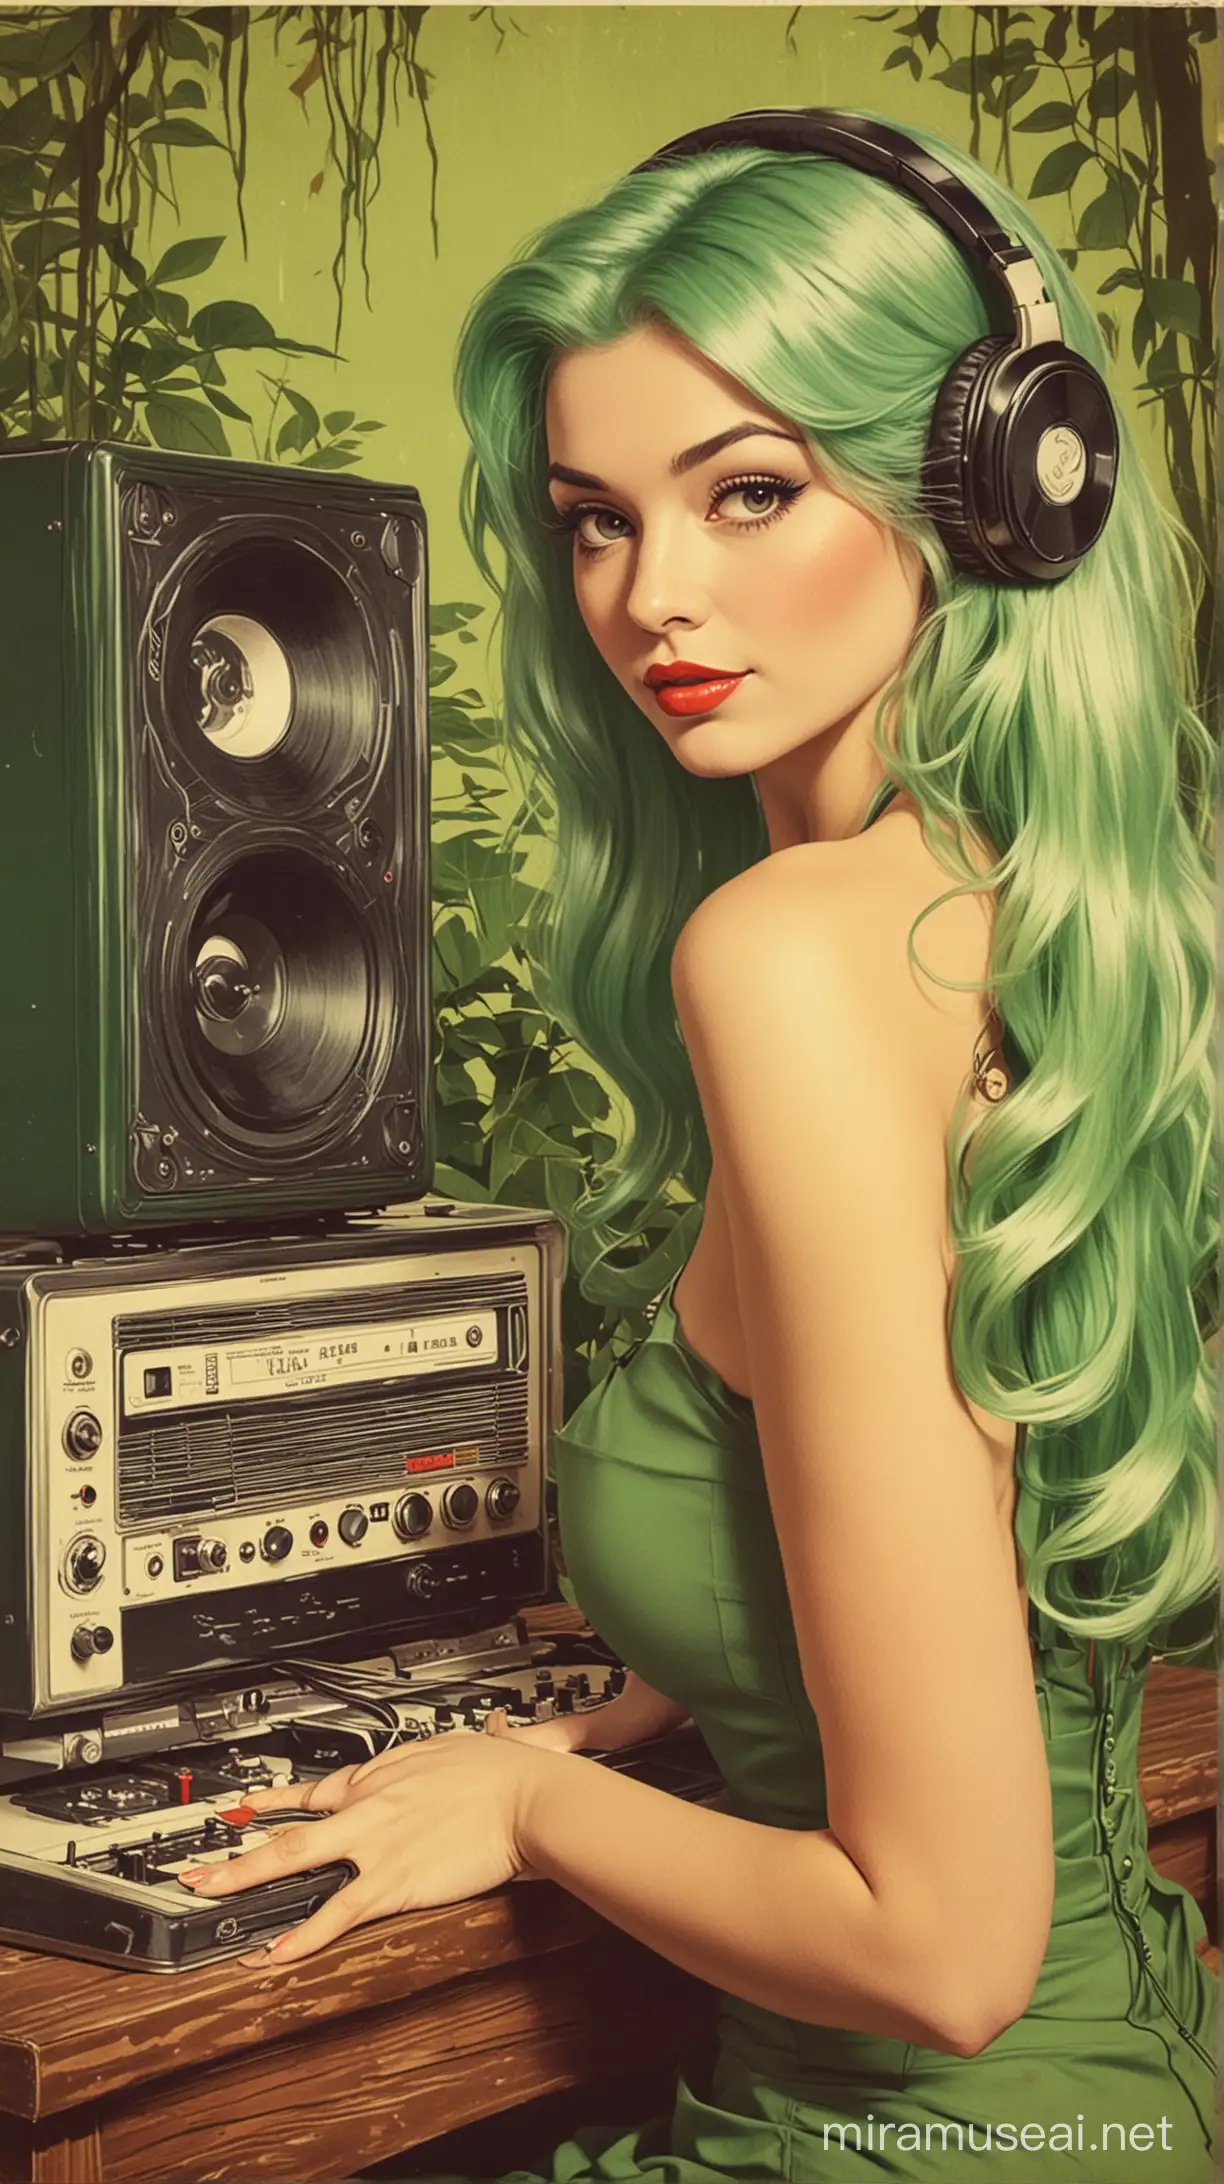 Retro poster design, retro colors. Pinup style. Very nice drawing, flat, 2d, vintage style. Vintage long green hair lady, swamp composition. Very elegant lady listening music with minidisc player.